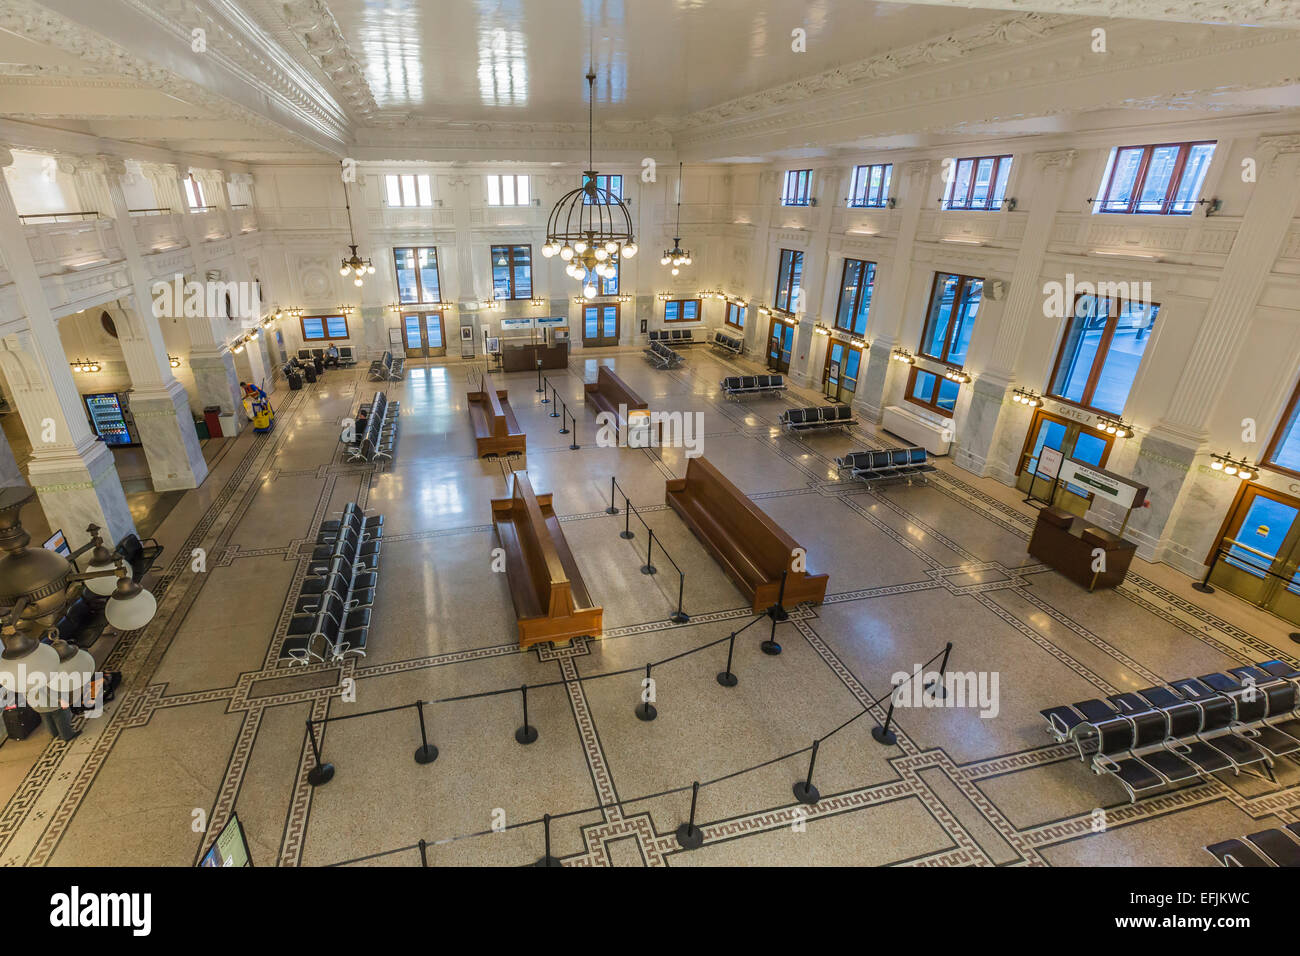 The waiting room of the elegant, recently renovated King Street Station served by Amtrak trains, Seattle, Washington, USA Stock Photo